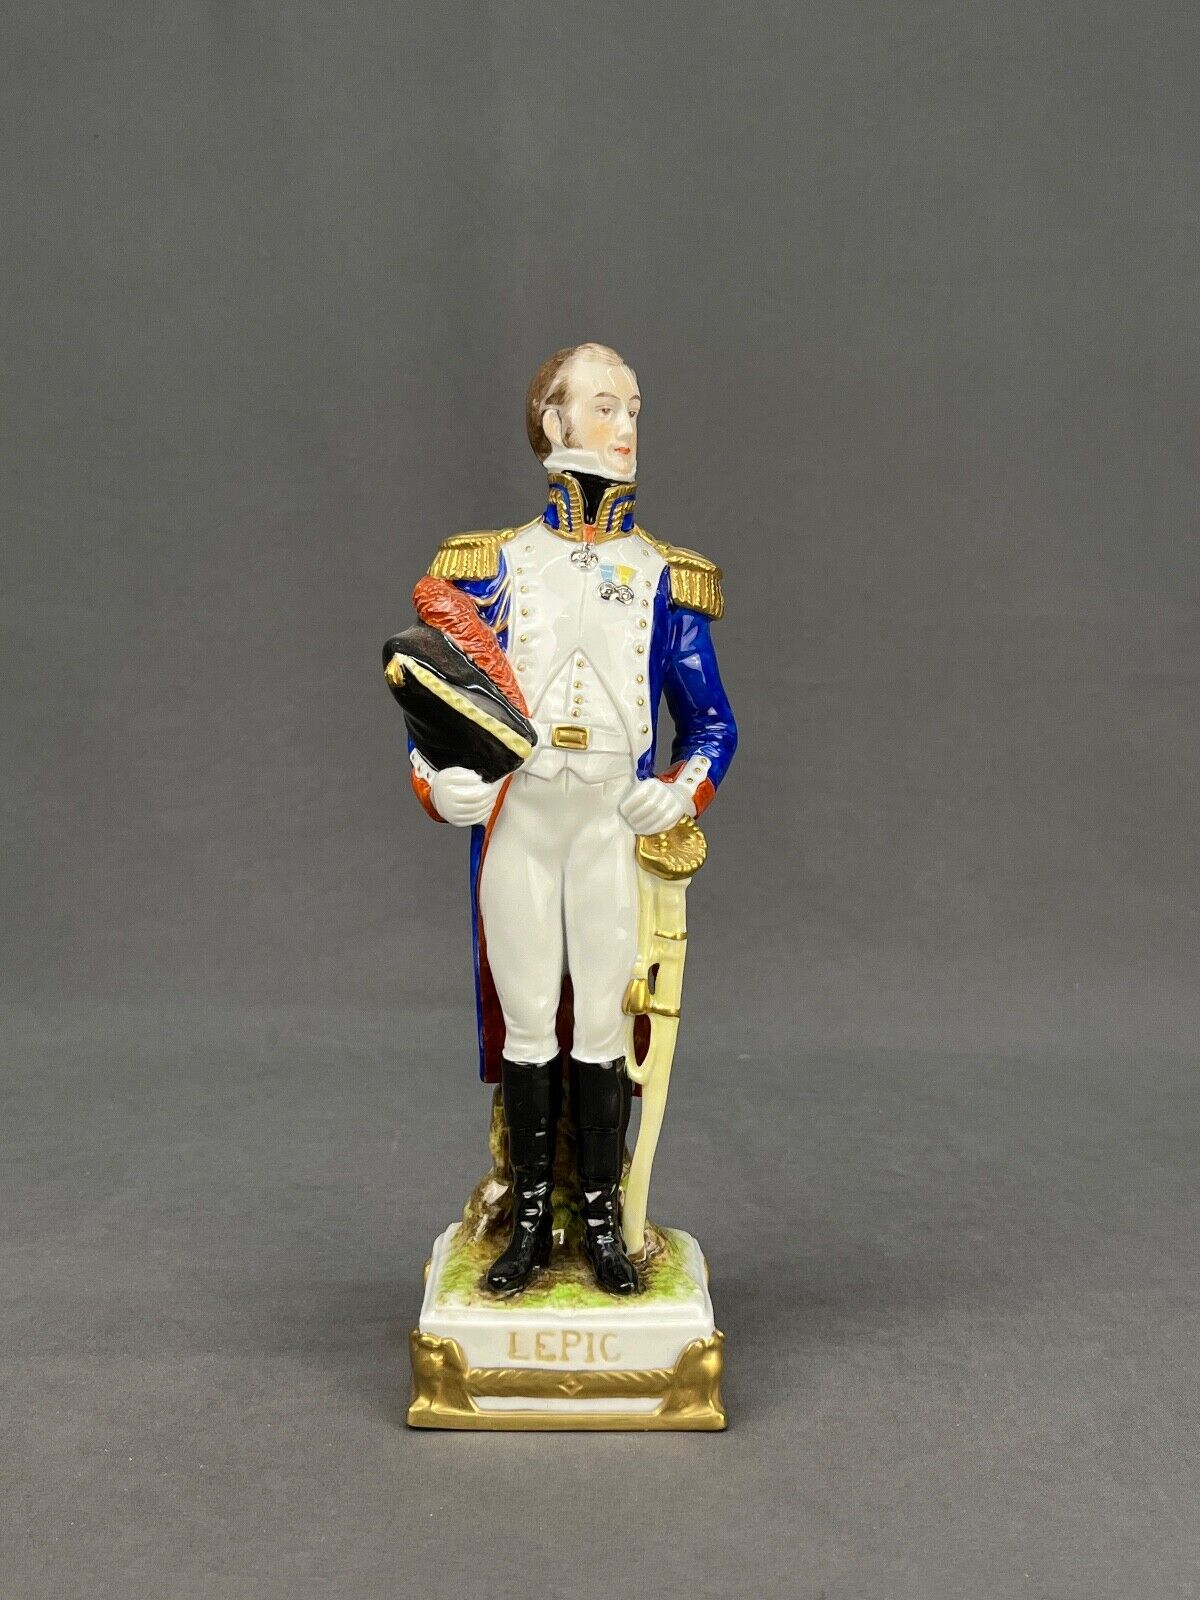 Scheibe-Alsbach Kister German Porcelain GENERAL LEPIC Napoleonic Statue Figurine